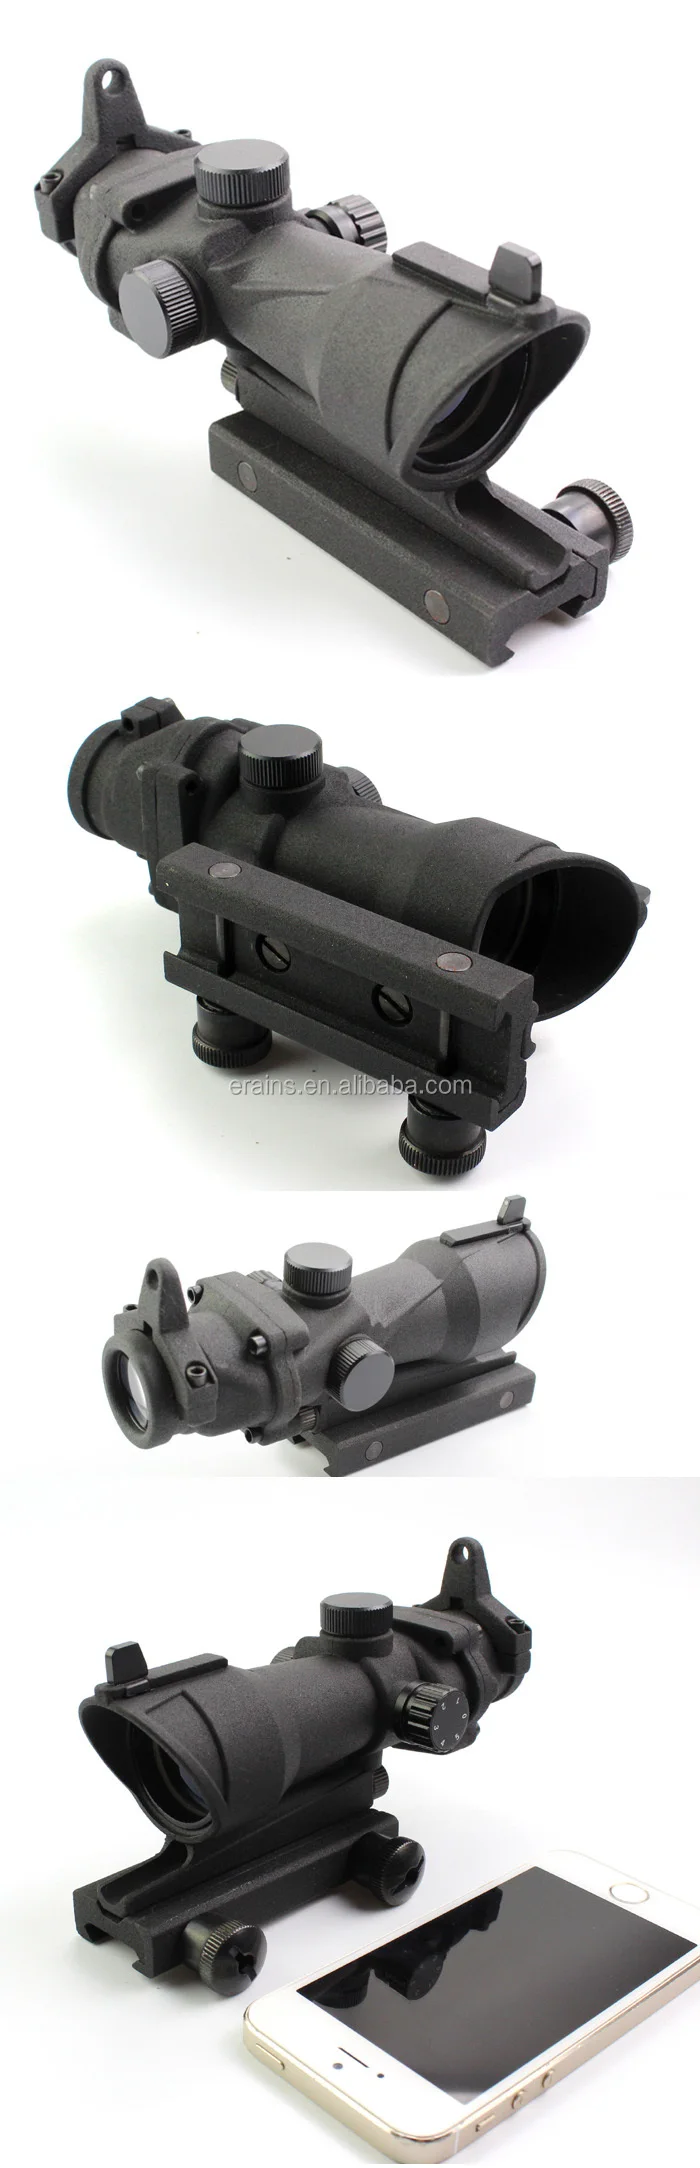 GD4X32 reticle trijicon style sight parts.jpg